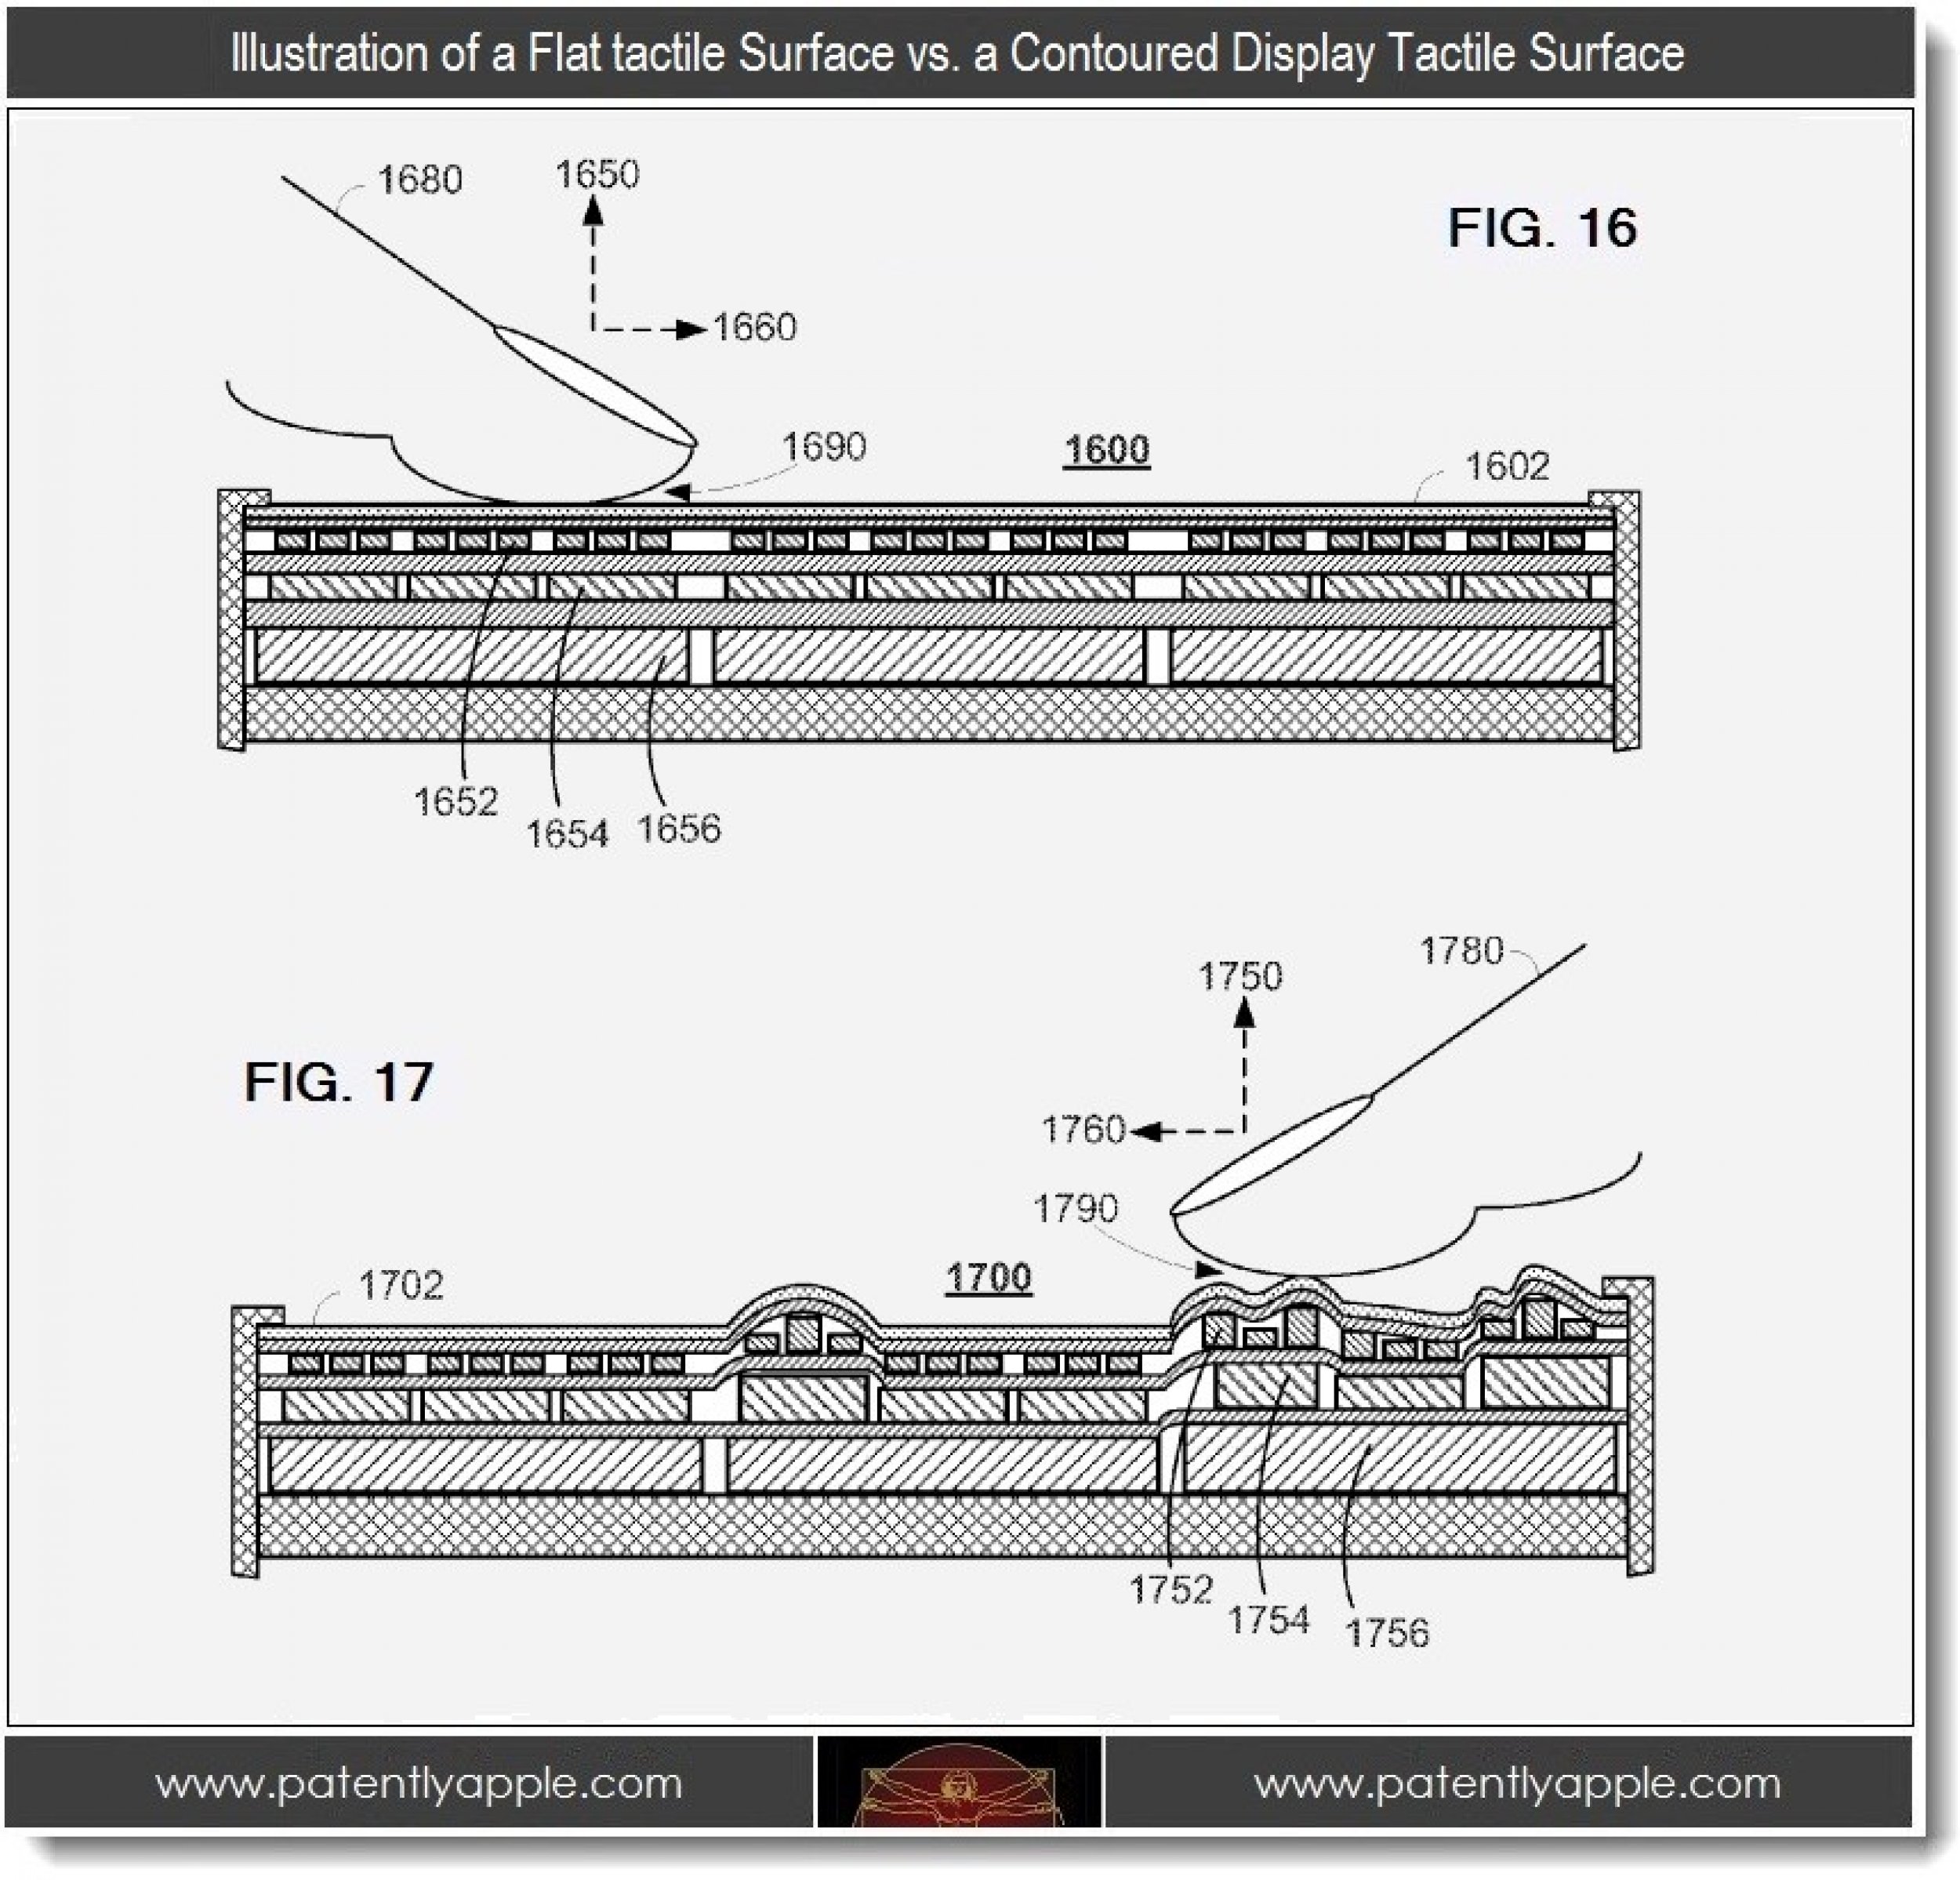 iPhone 5 Features Apple Patents Advanced Haptics For Flexible OLED Screen PICTURES